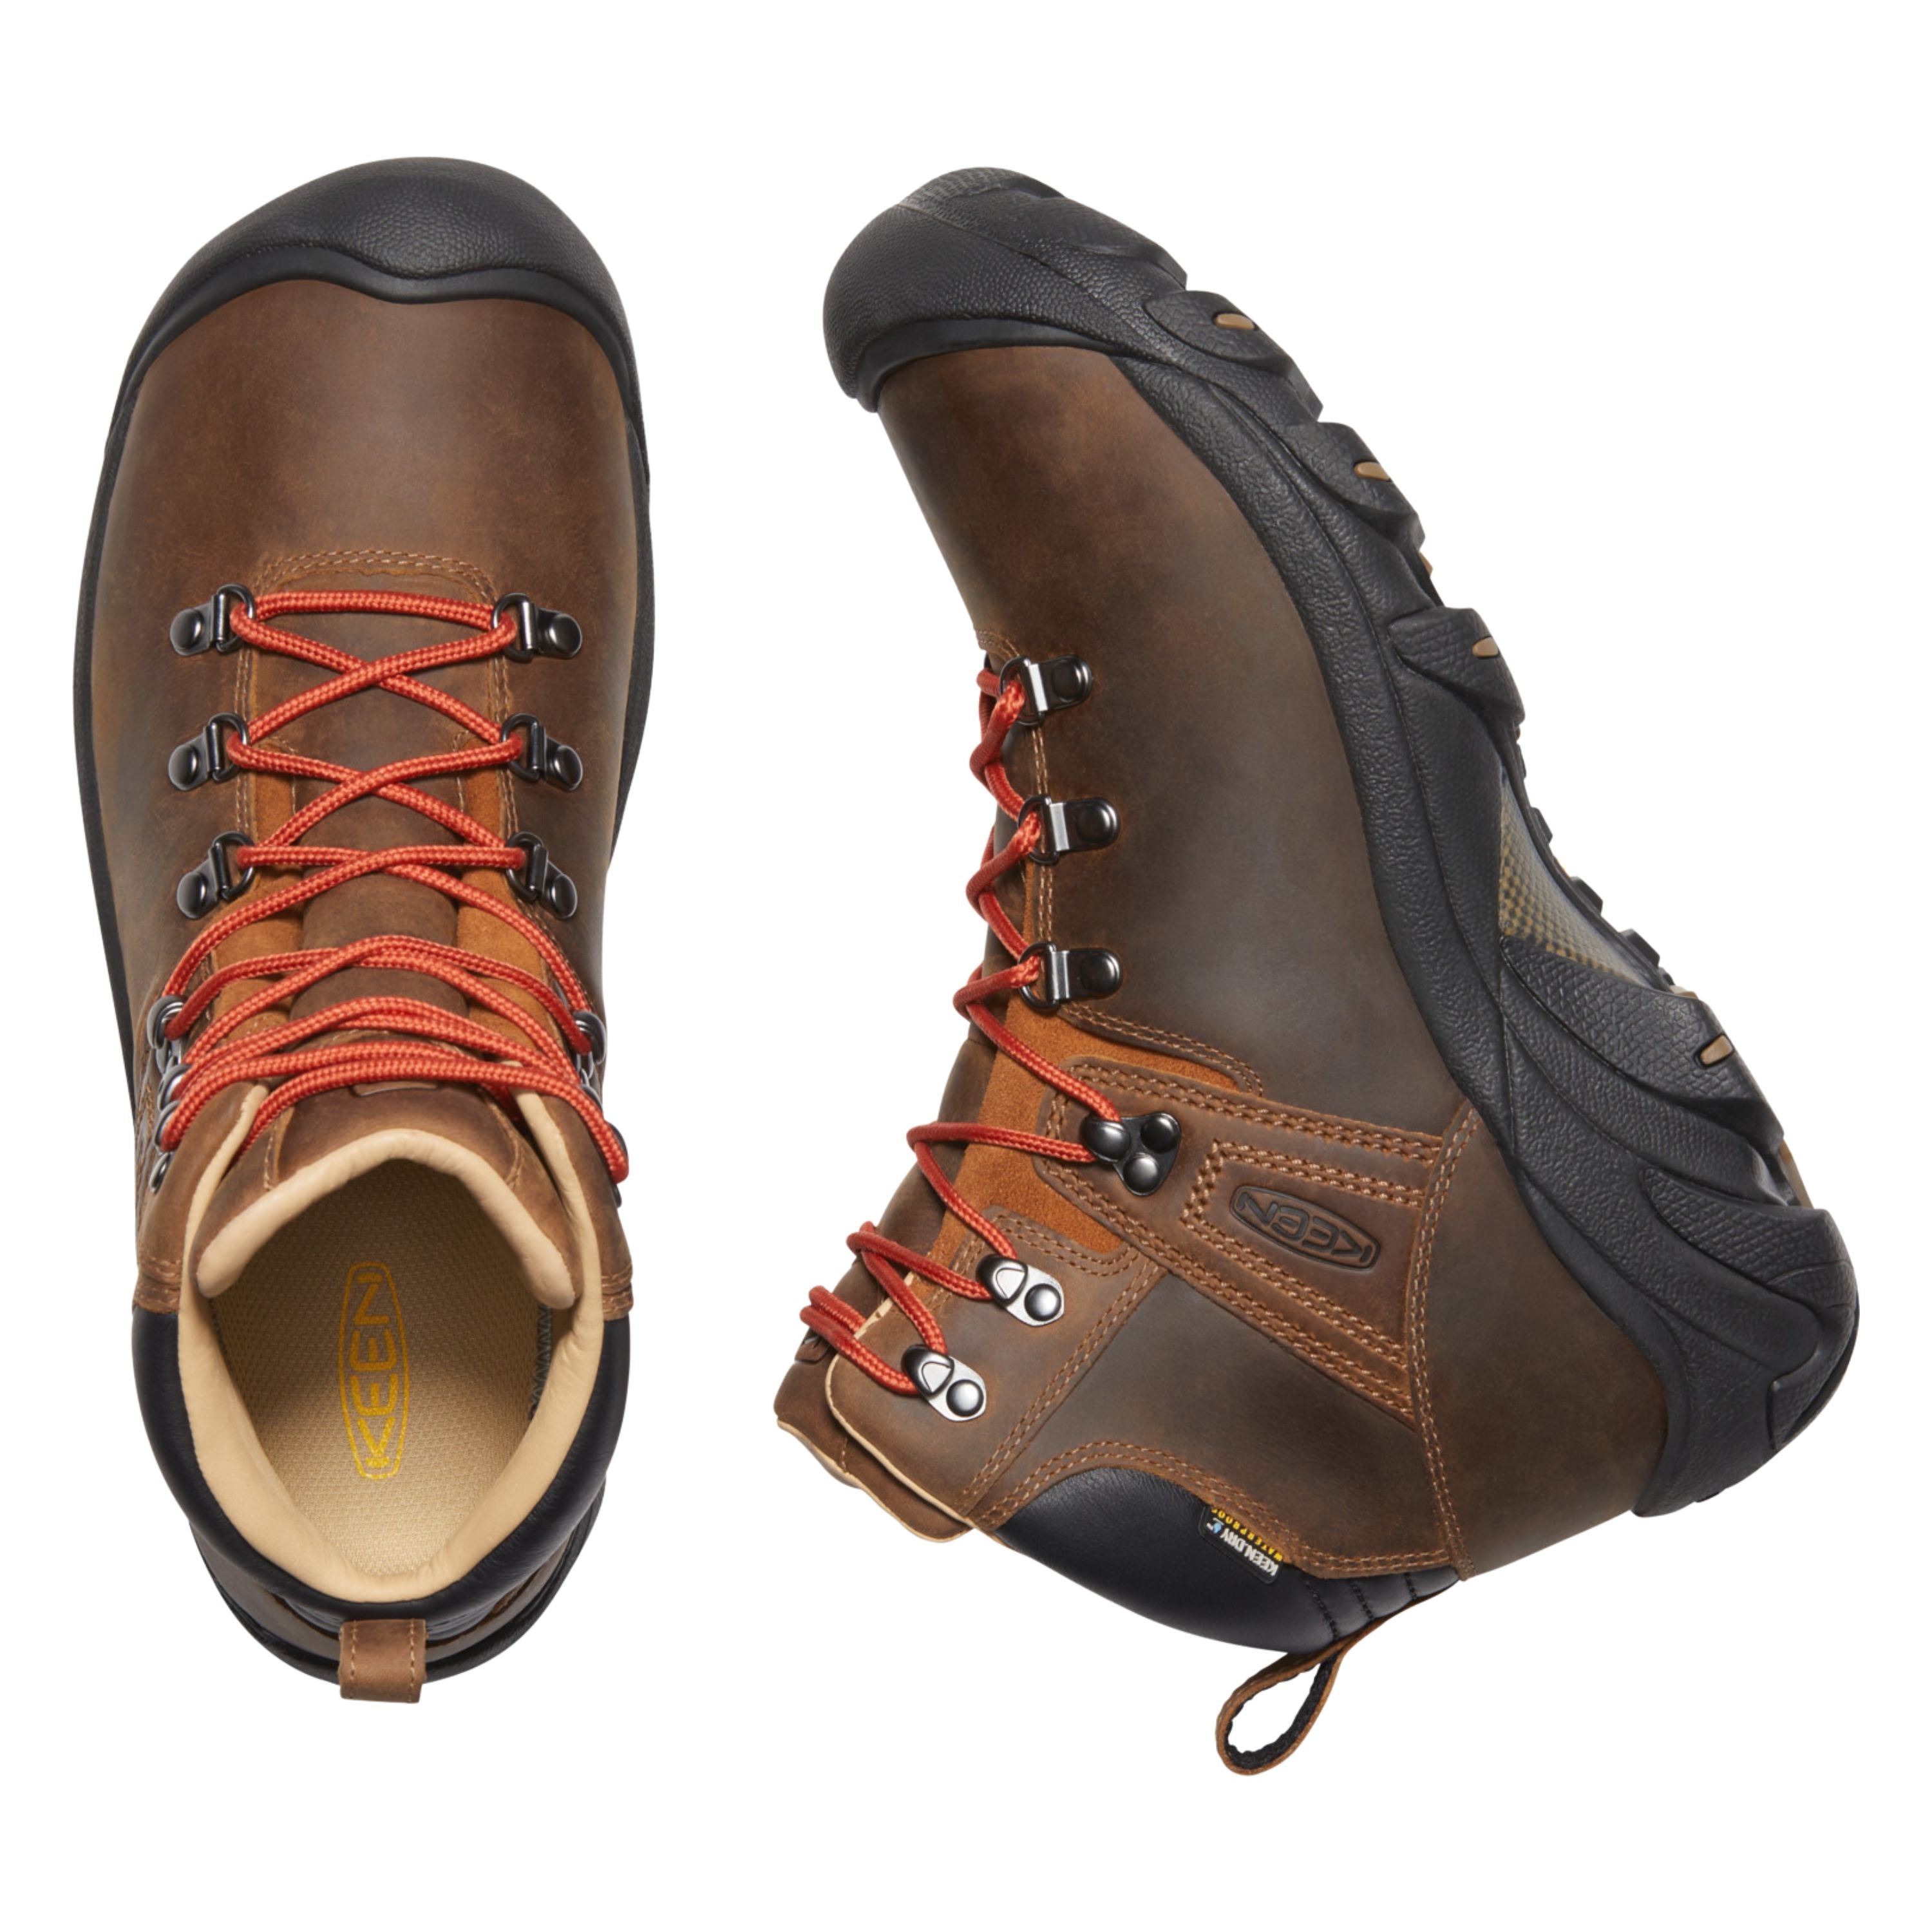 "Pyrenees" Hiking boots - Men's